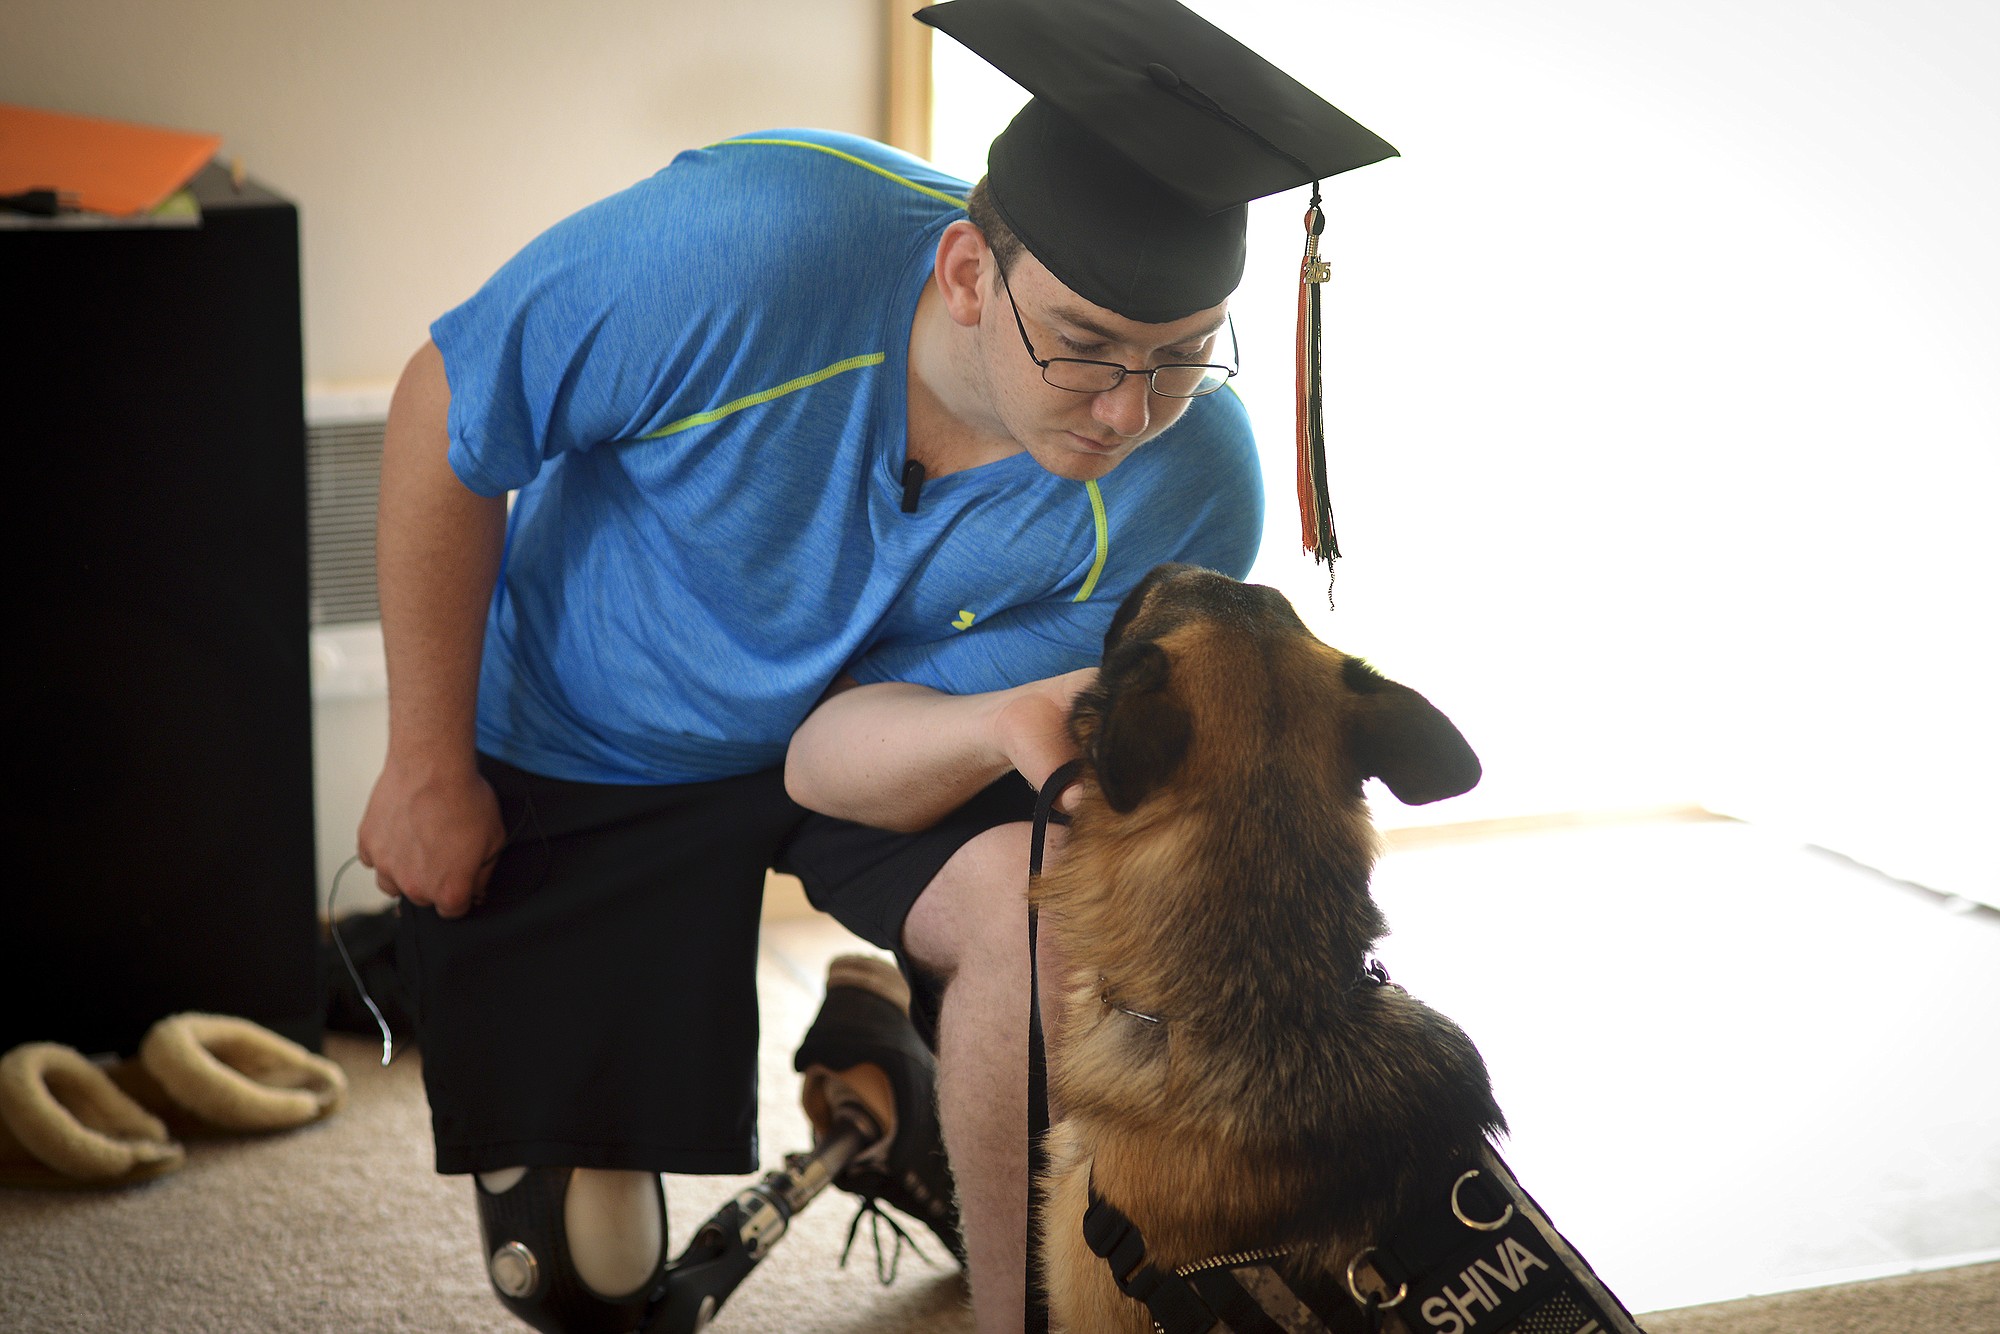 Ariane Kunze/The Columbian
Justin Carey was struck by a vehicle on June 10, 2013, and ended up losing the lower half of his right leg. Today, Carey graduates from Battle Ground High School, exactly two years after the crash.